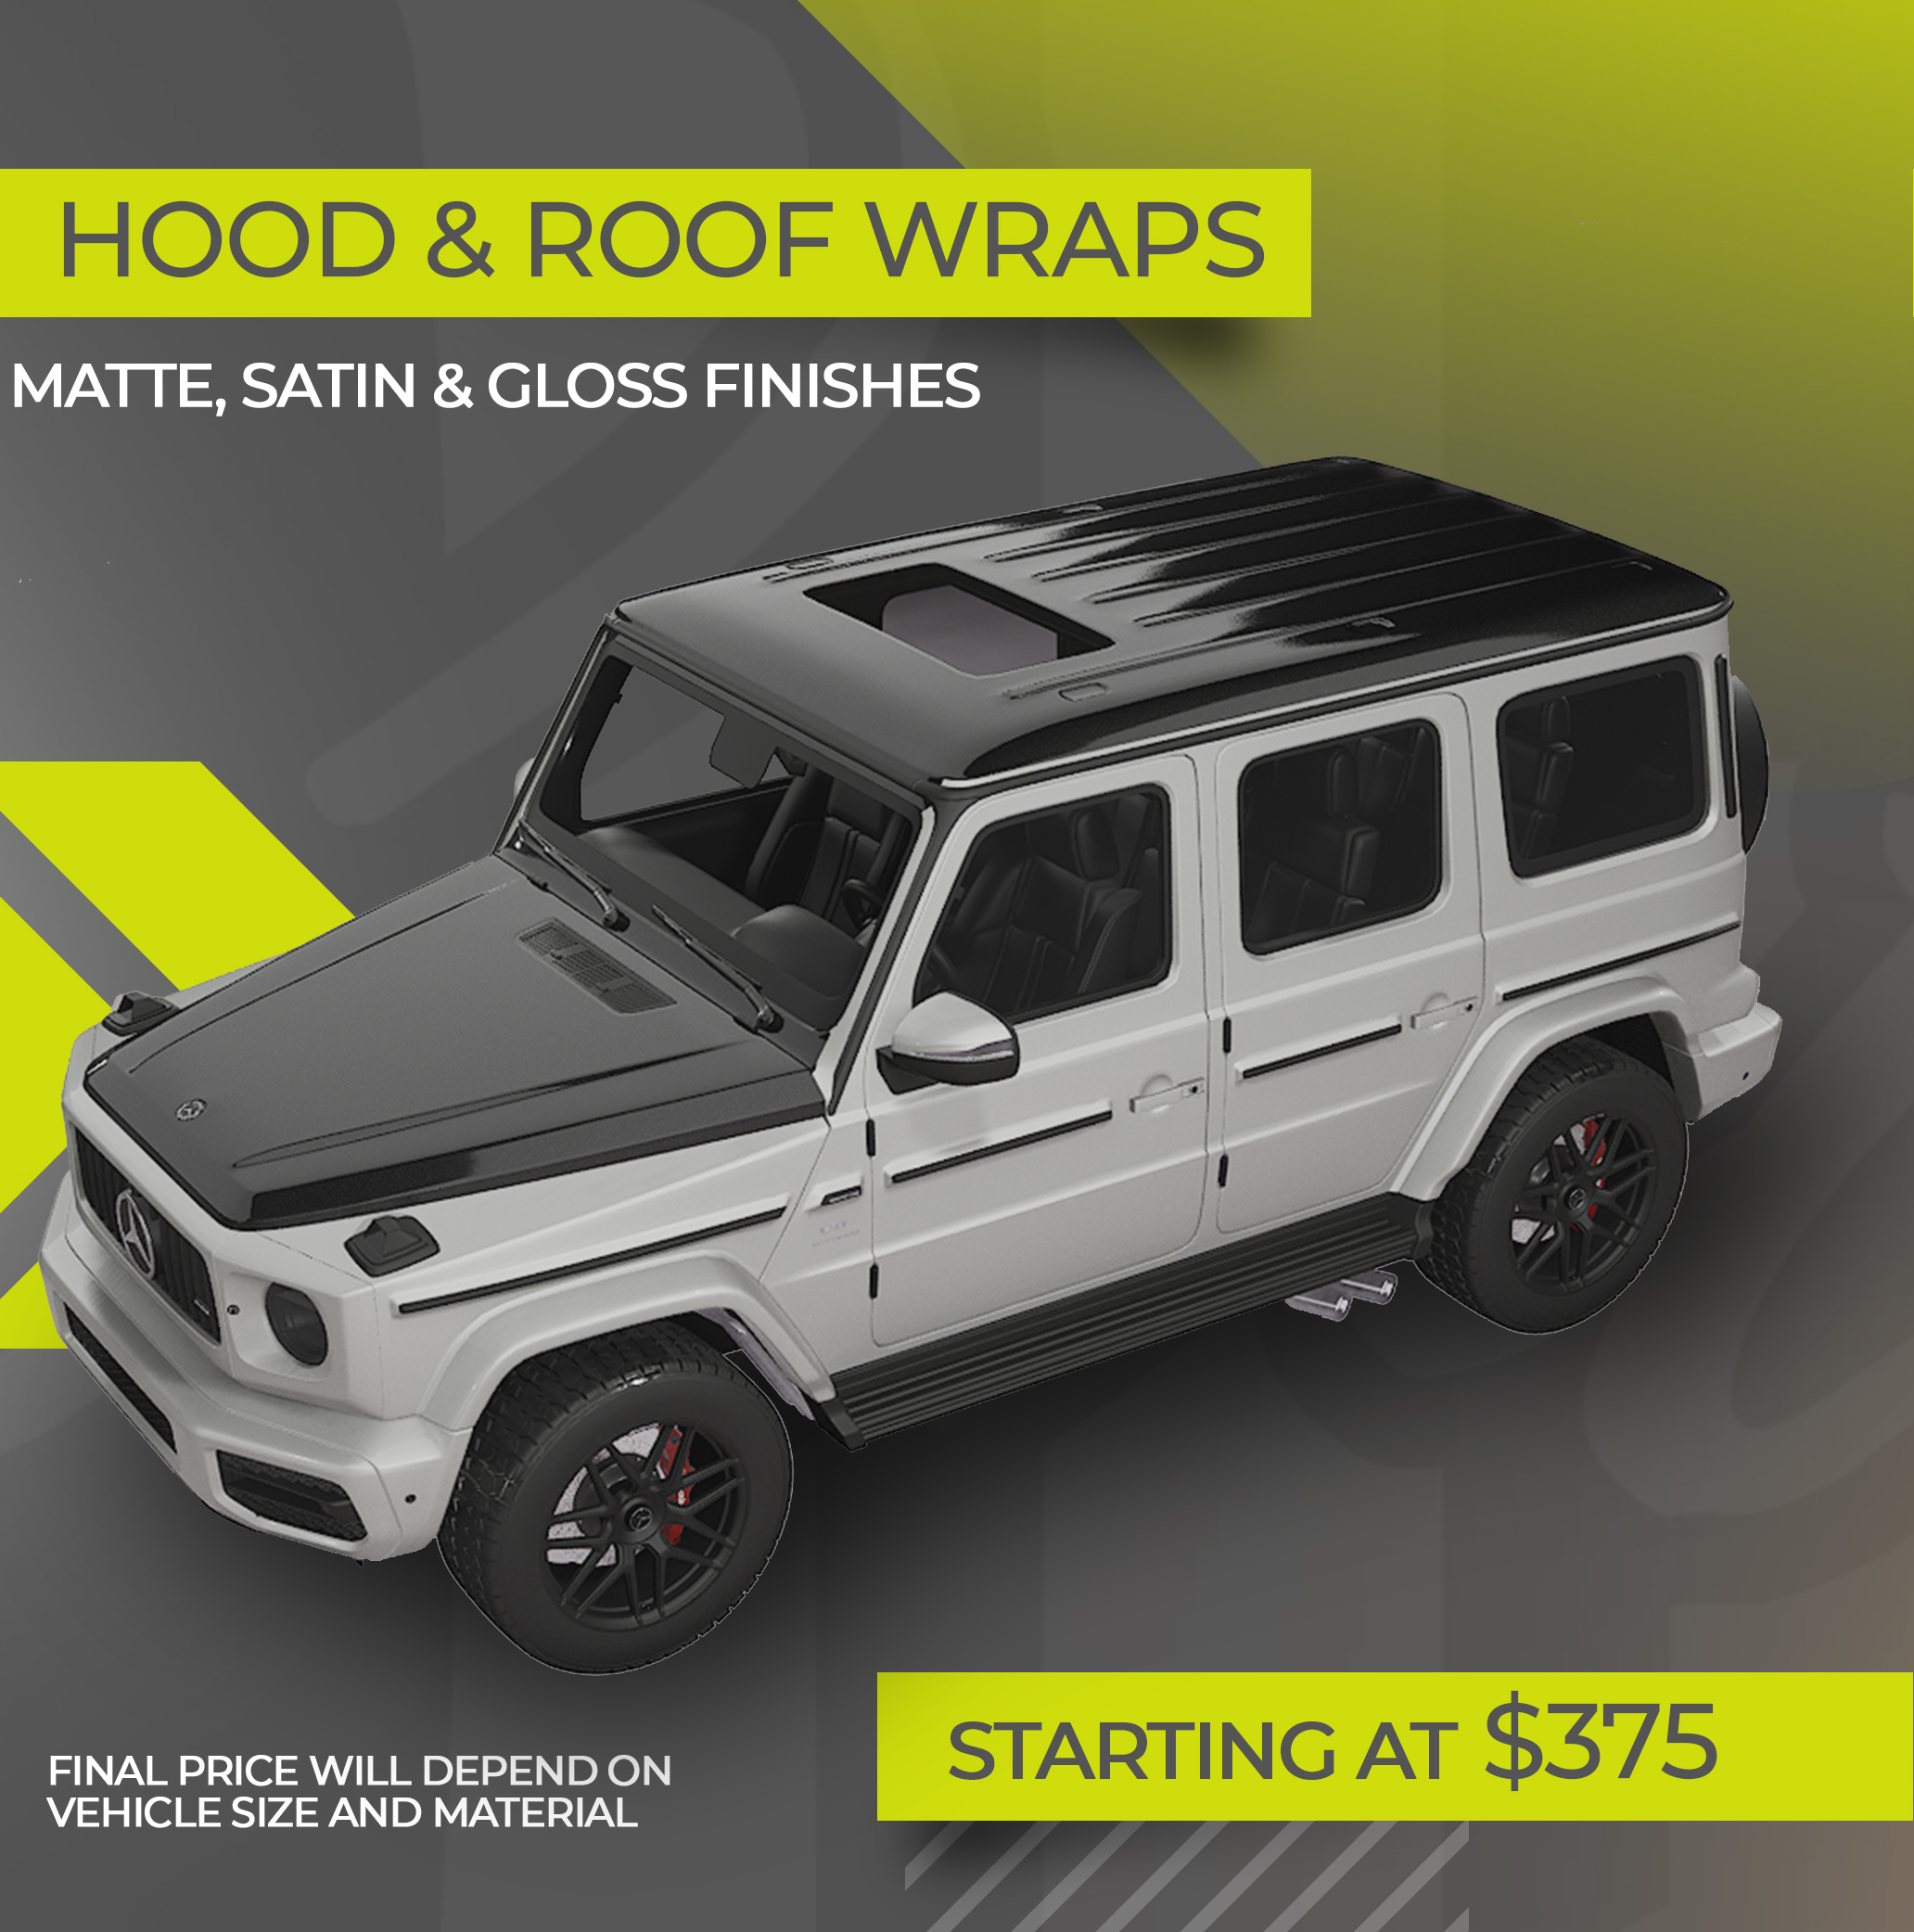 Hood & Roof Wraps Starting at: